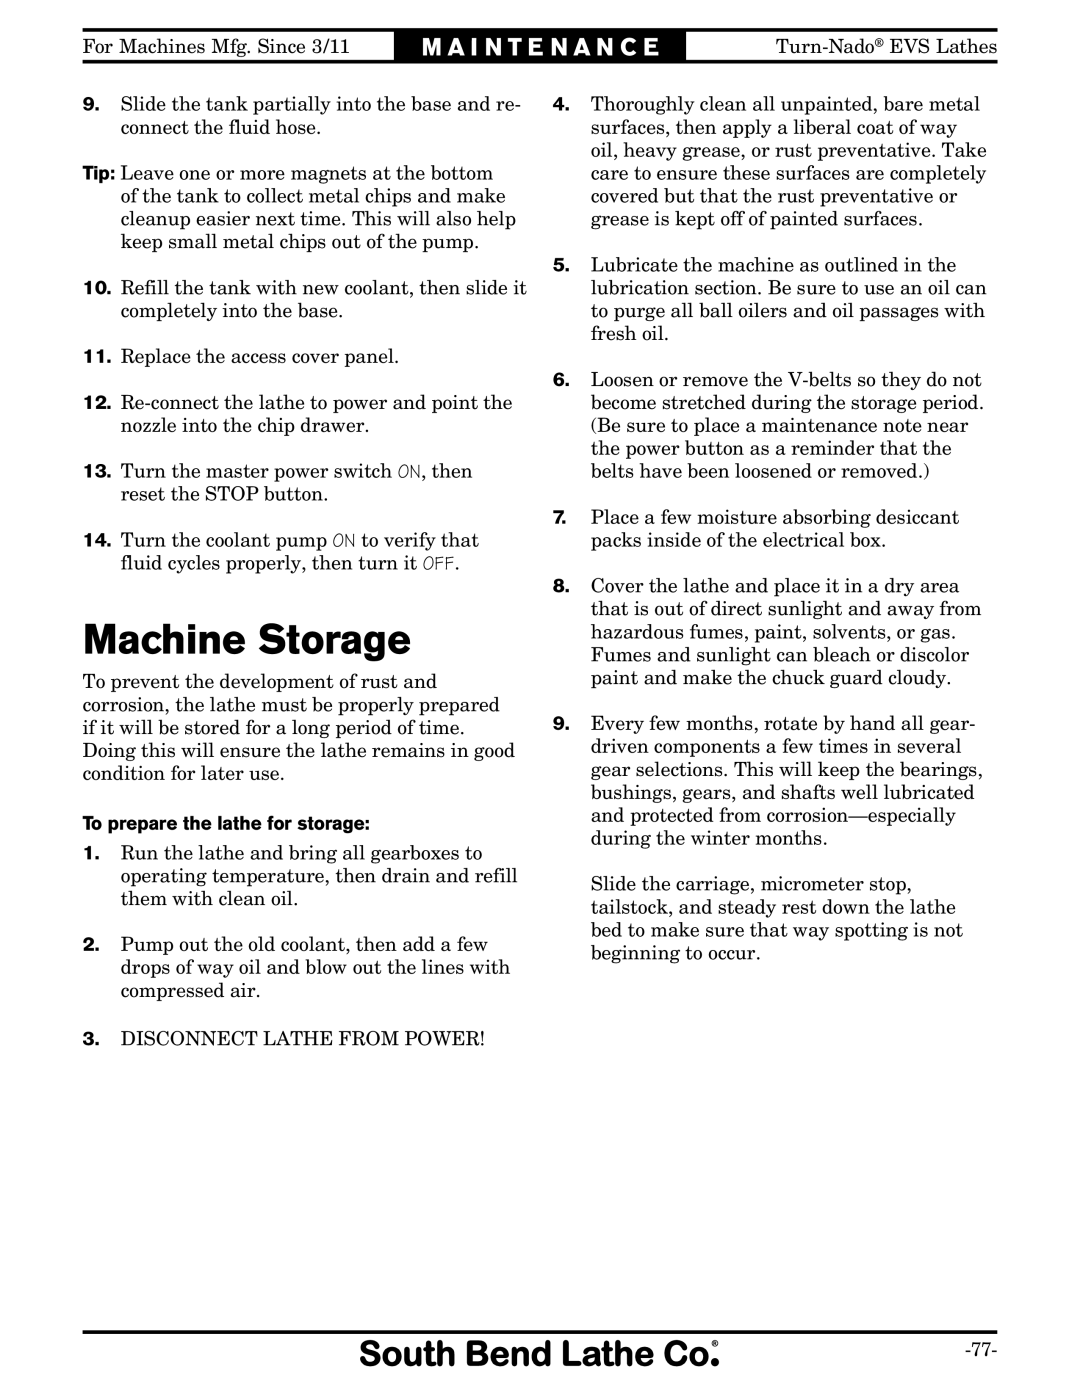 Southbend SB1042PF owner manual Machine Storage, To prepare the lathe for storage 